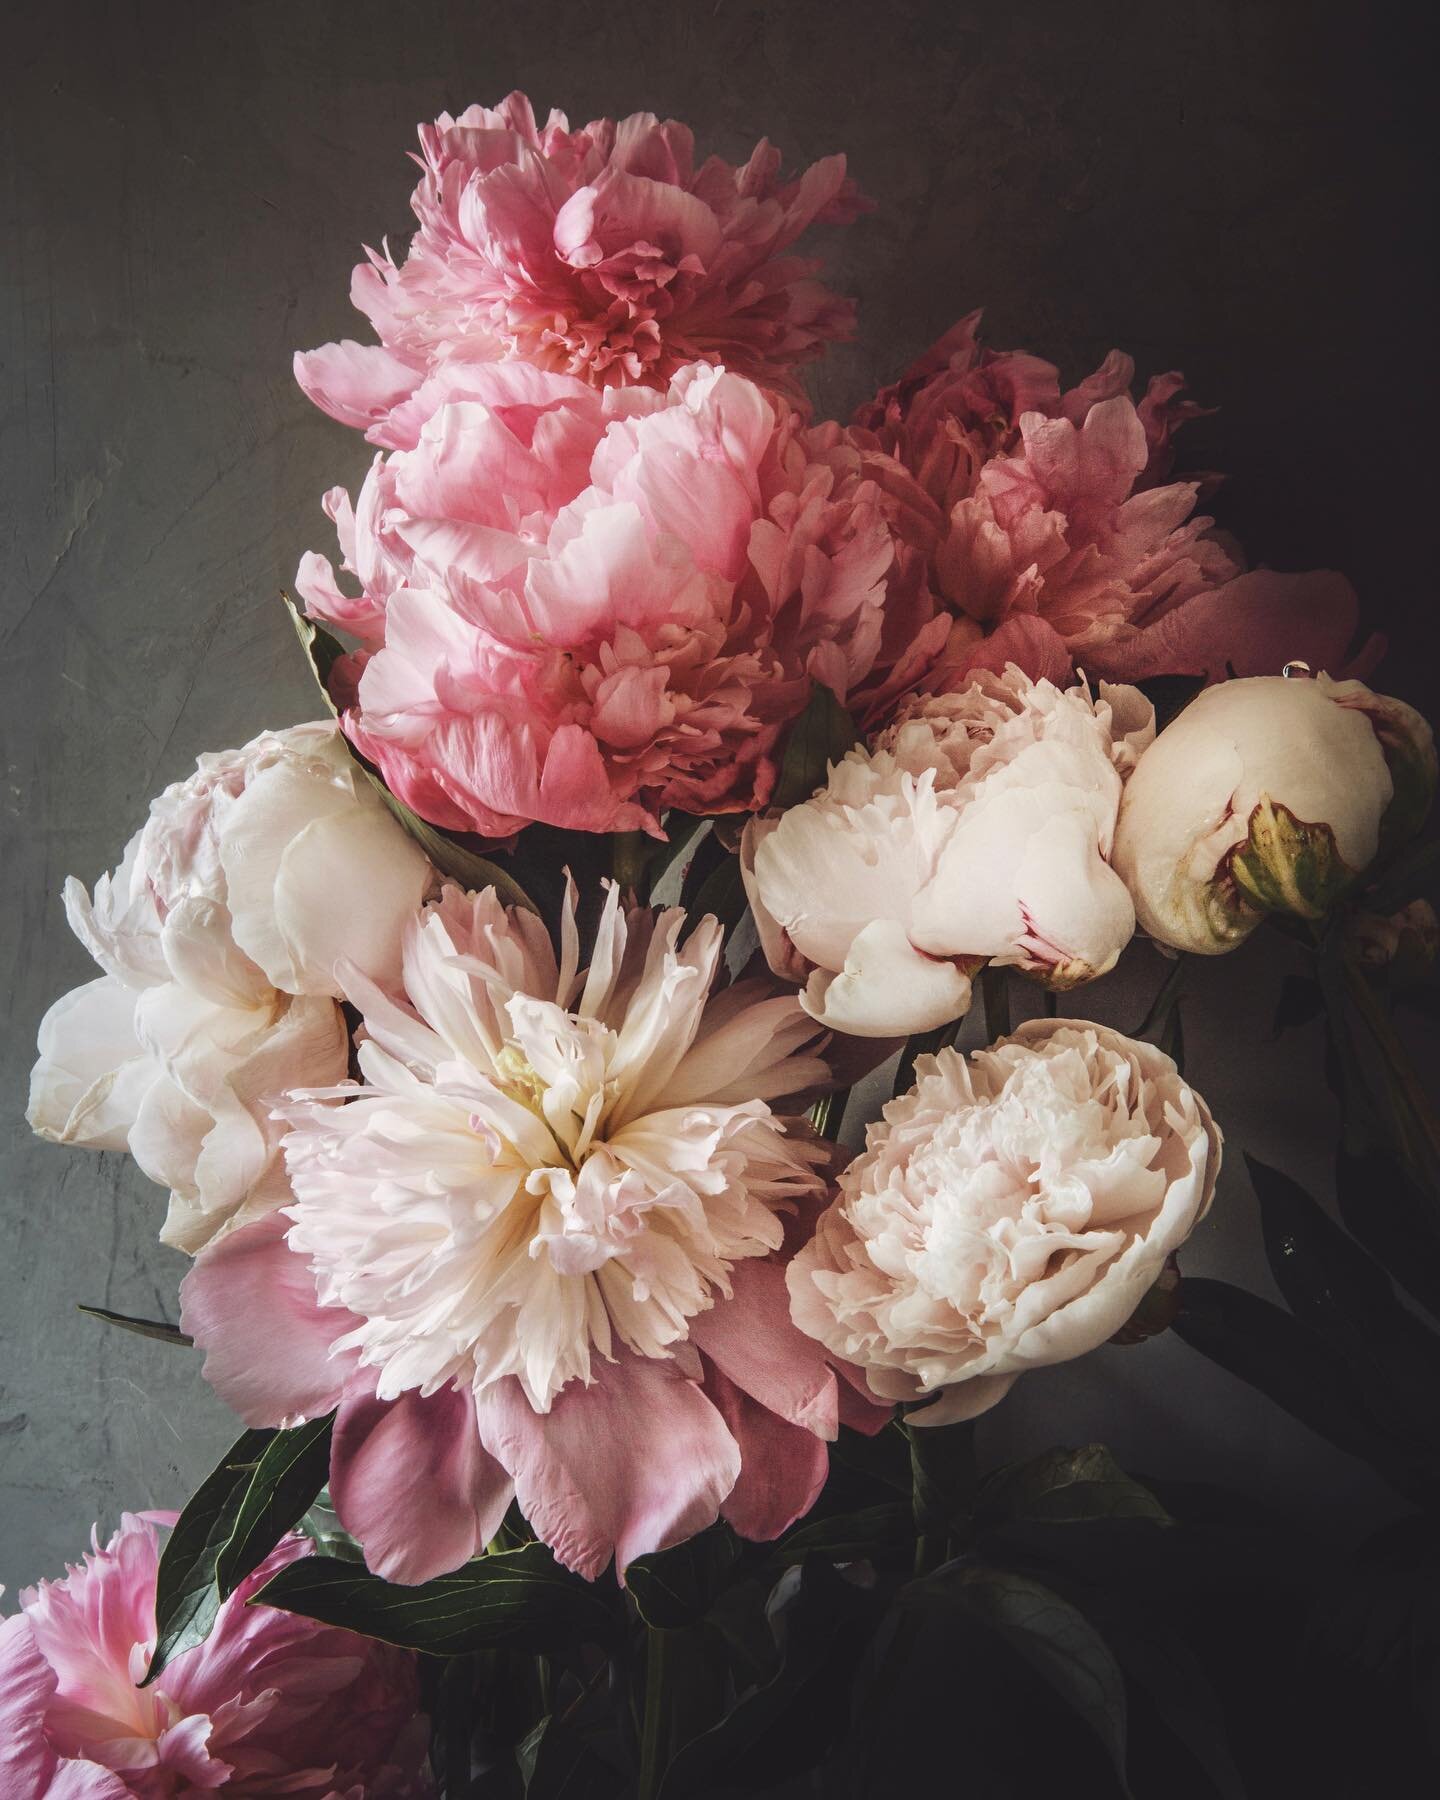 Still life with peonies, 2021 | I thought I&rsquo;d somehow missed peony season this year here in California. I haven&rsquo;t made a still life in several weeks, anyway. But @_tiffanyrogan brought me a surprise bundle this week and we&rsquo;re off to